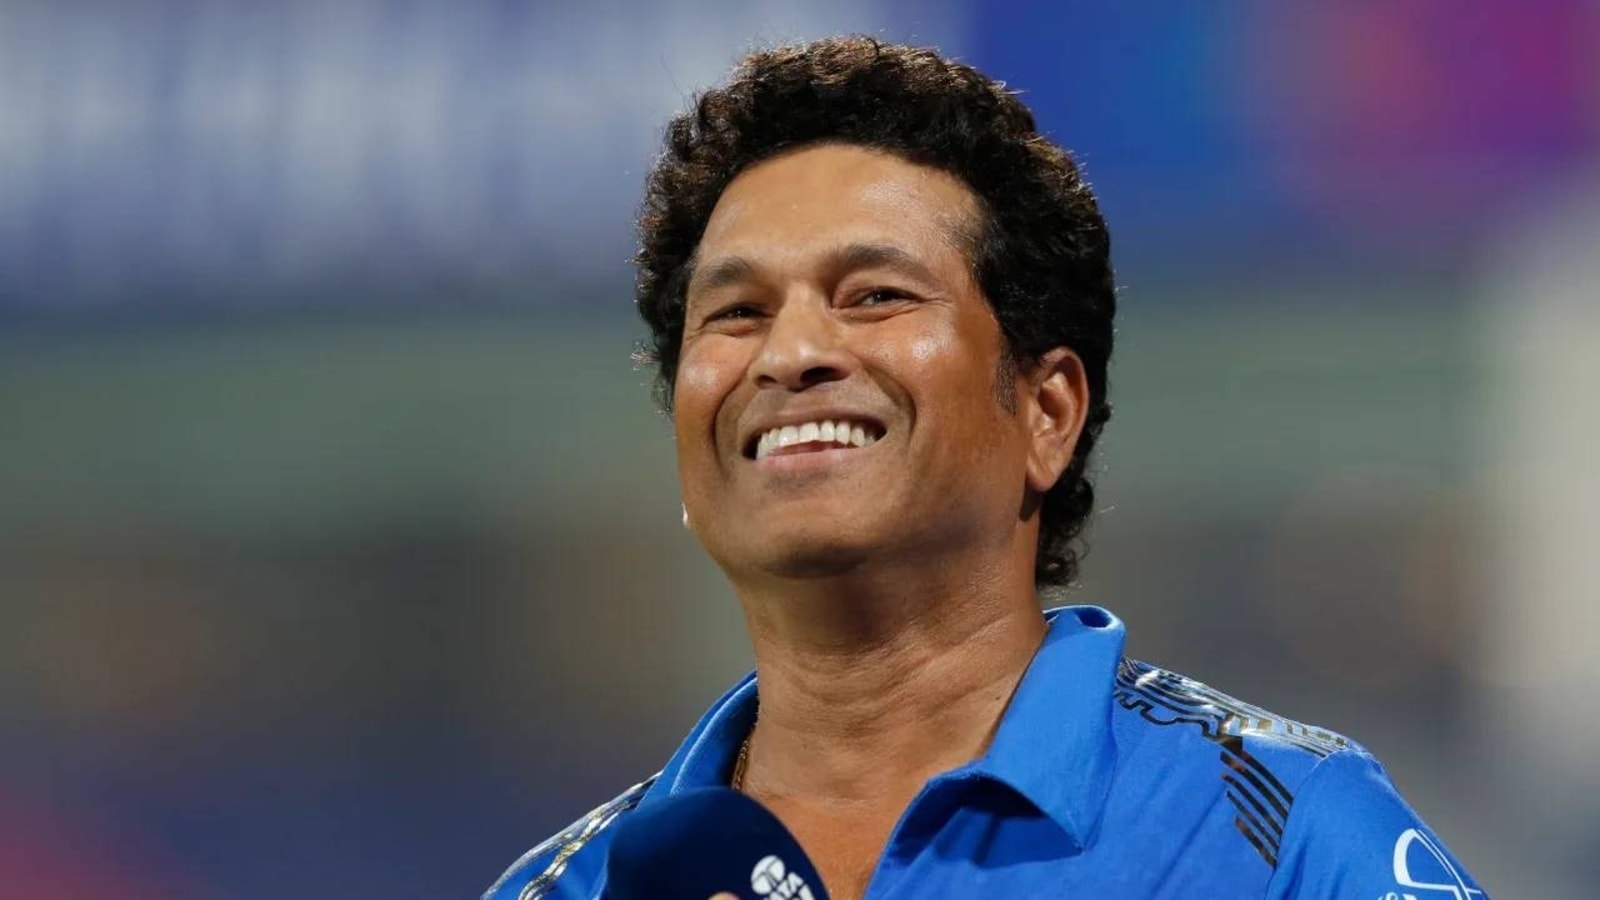 He knows he needn't worry about getting picked': Tendulkar on rising India  star | Cricket - Hindustan Times